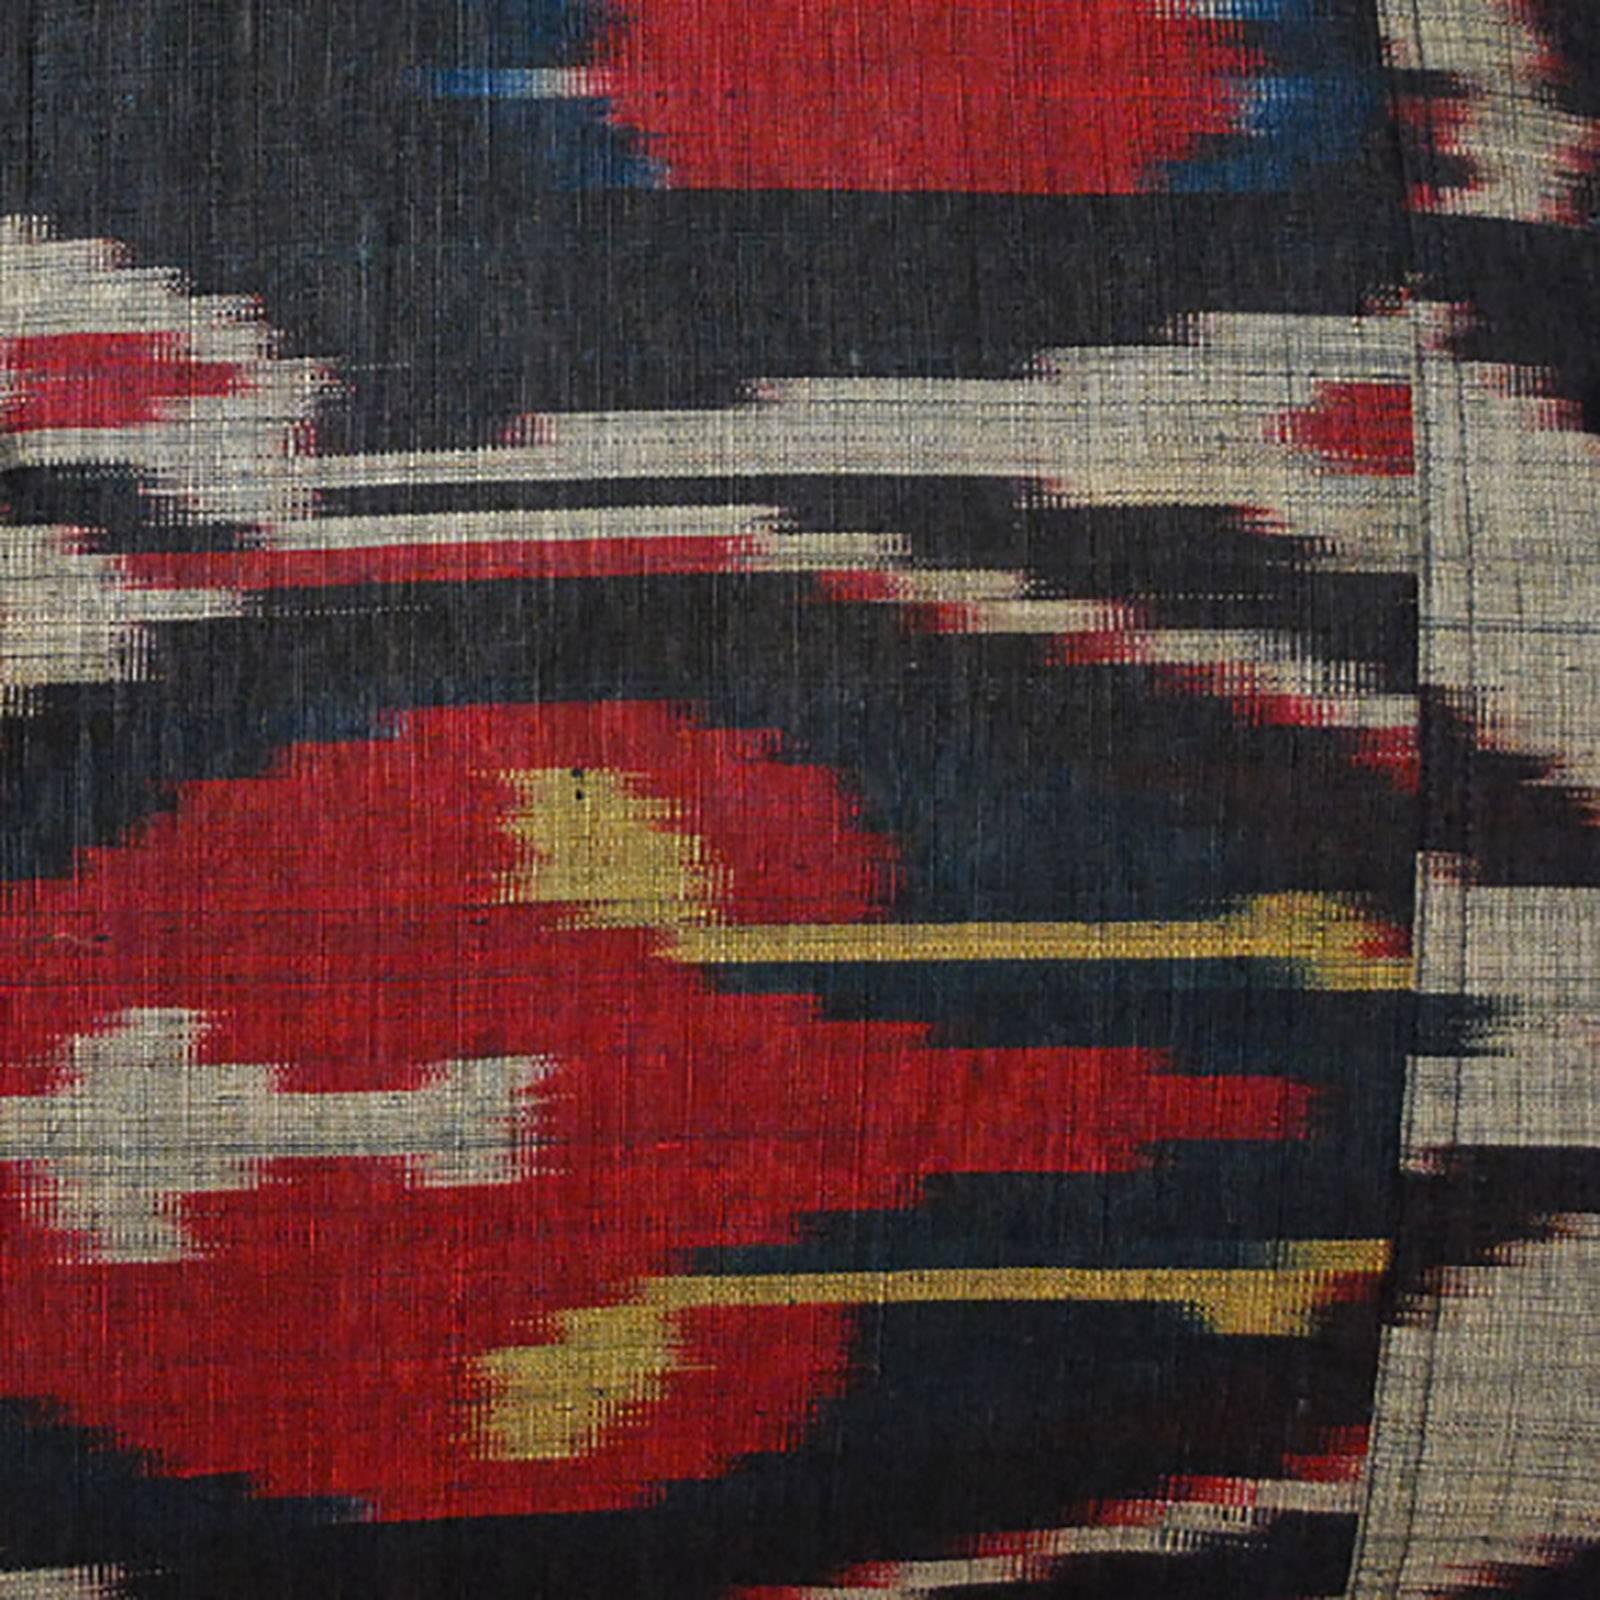 This artisan-designed pillow is made by hand of vintage Indonesian ikat fabric. Ikat is a dyeing technique used to pattern textiles that employs a resist dyeing process. The resist is formed by binding individual yarns or bundles of yarns with a